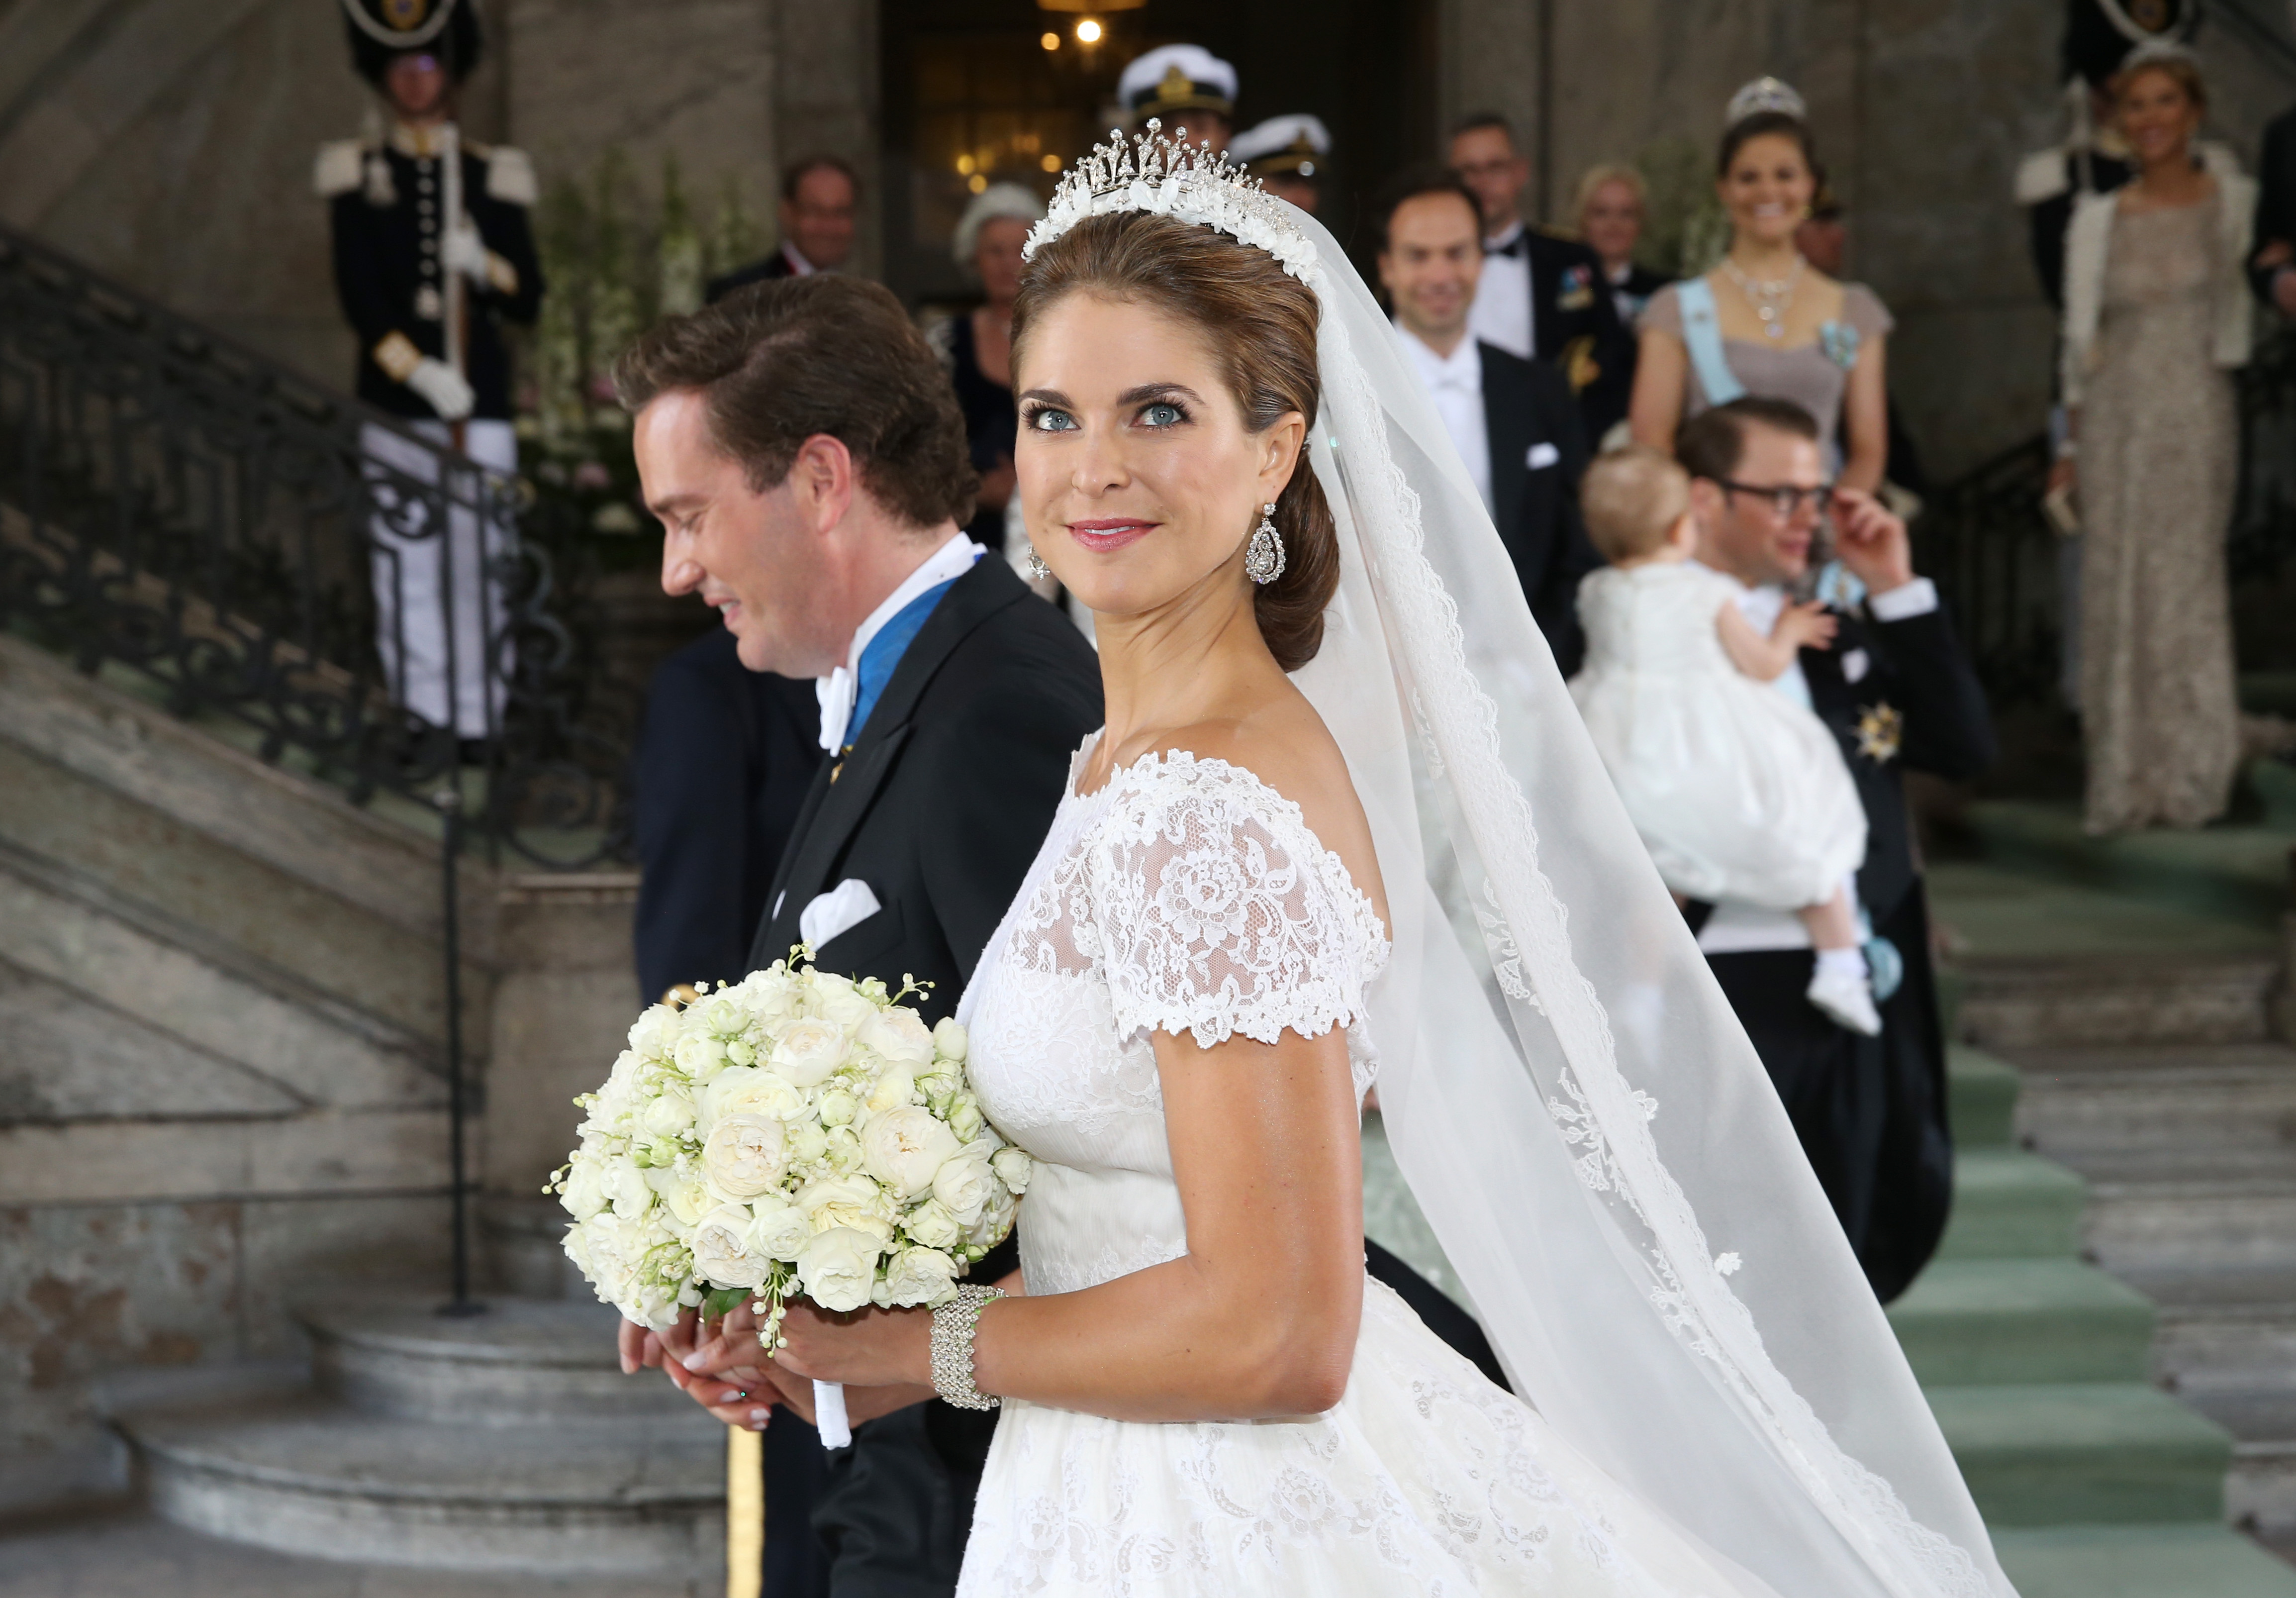 STOCKHOLM, SWEDEN - JUNE 08: Princess Madeleine of Sweden and Christopher O'Neill depart from the wedding ceremony of Princess Madeleine of Sweden and Christopher O'Neill hosted by King Carl Gustaf XIV and Queen Silvia at The Royal Palace on June 8, 2013 in Stockholm, Sweden. 